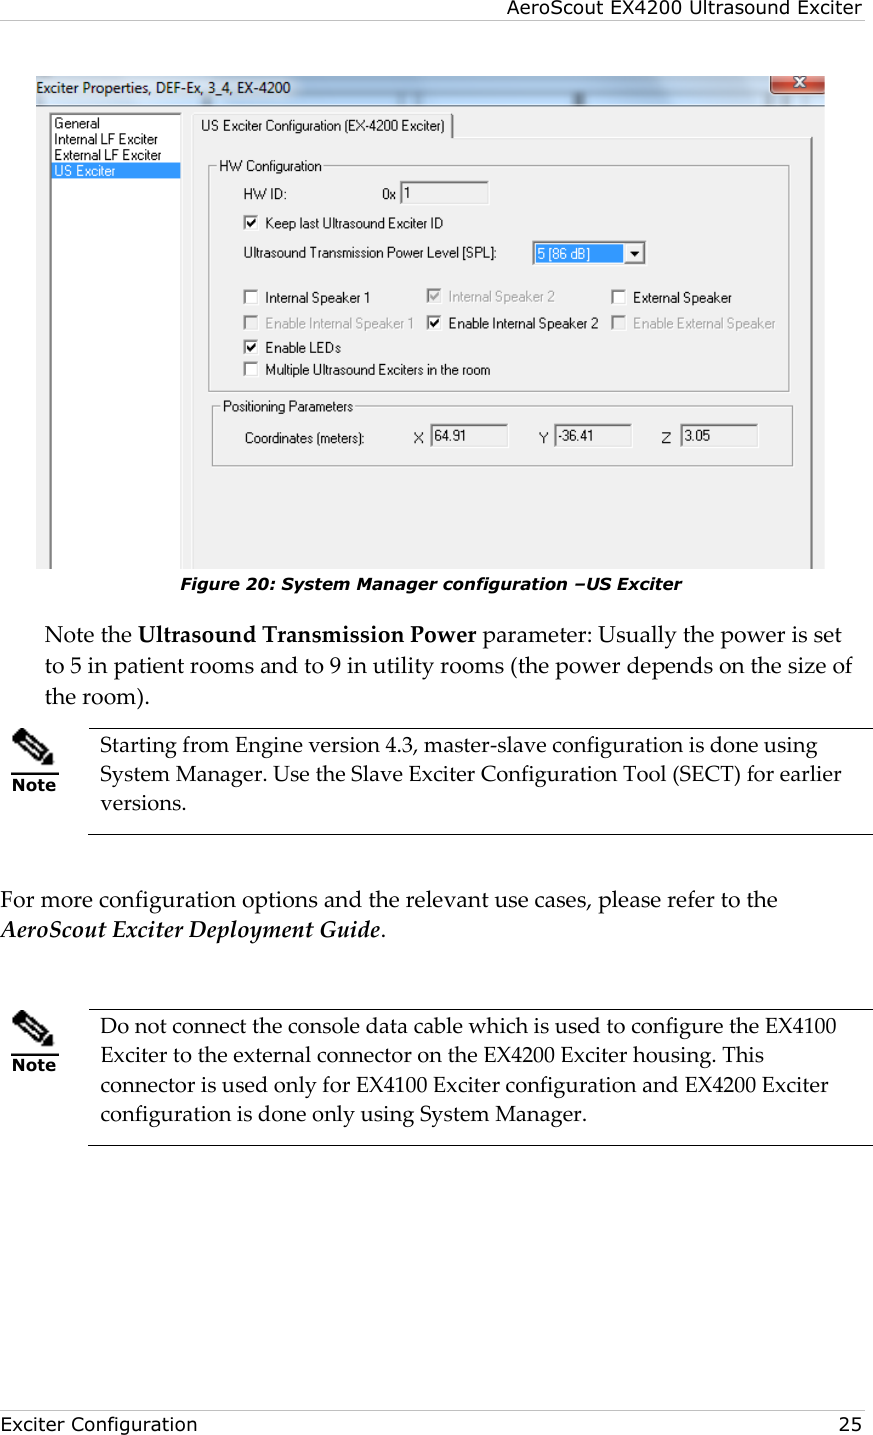 AeroScout EX4200 Ultrasound Exciter  Exciter Configuration    25  Figure 20: System Manager configuration –US Exciter Note the Ultrasound Transmission Power parameter: Usually the power is set to 5 in patient rooms and to 9 in utility rooms (the power depends on the size of the room).  Note Starting from Engine version 4.3, master-slave configuration is done using System Manager. Use the Slave Exciter Configuration Tool (SECT) for earlier versions.  For more configuration options and the relevant use cases, please refer to the AeroScout Exciter Deployment Guide.   Note Do not connect the console data cable which is used to configure the EX4100 Exciter to the external connector on the EX4200 Exciter housing. This connector is used only for EX4100 Exciter configuration and EX4200 Exciter configuration is done only using System Manager. 